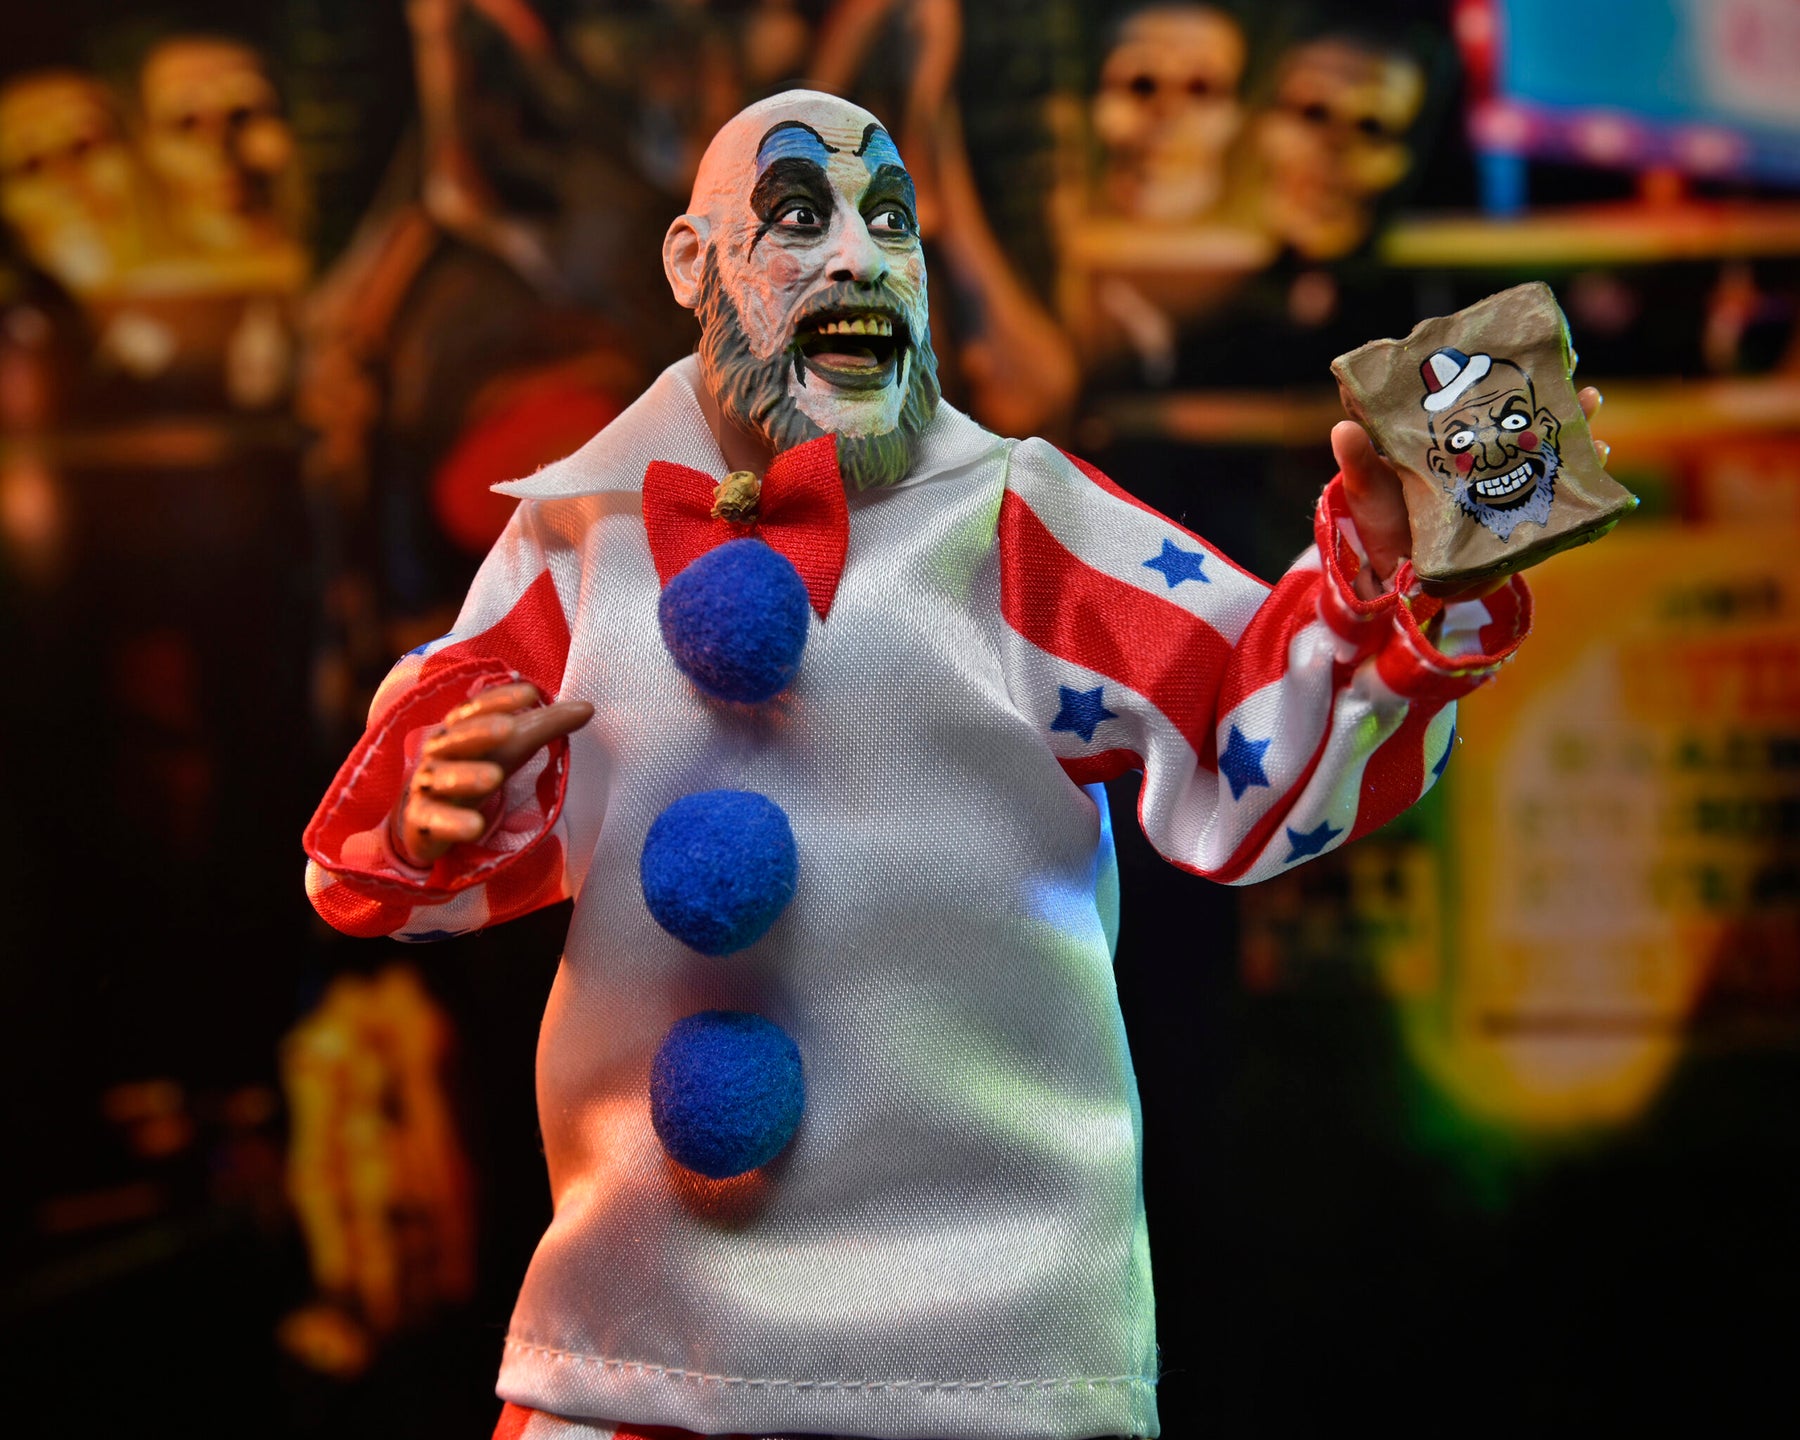 NECA - House of 1000 Corpses - Captain Spaulding (20th Anniversary) 8" Clothed Action Figure